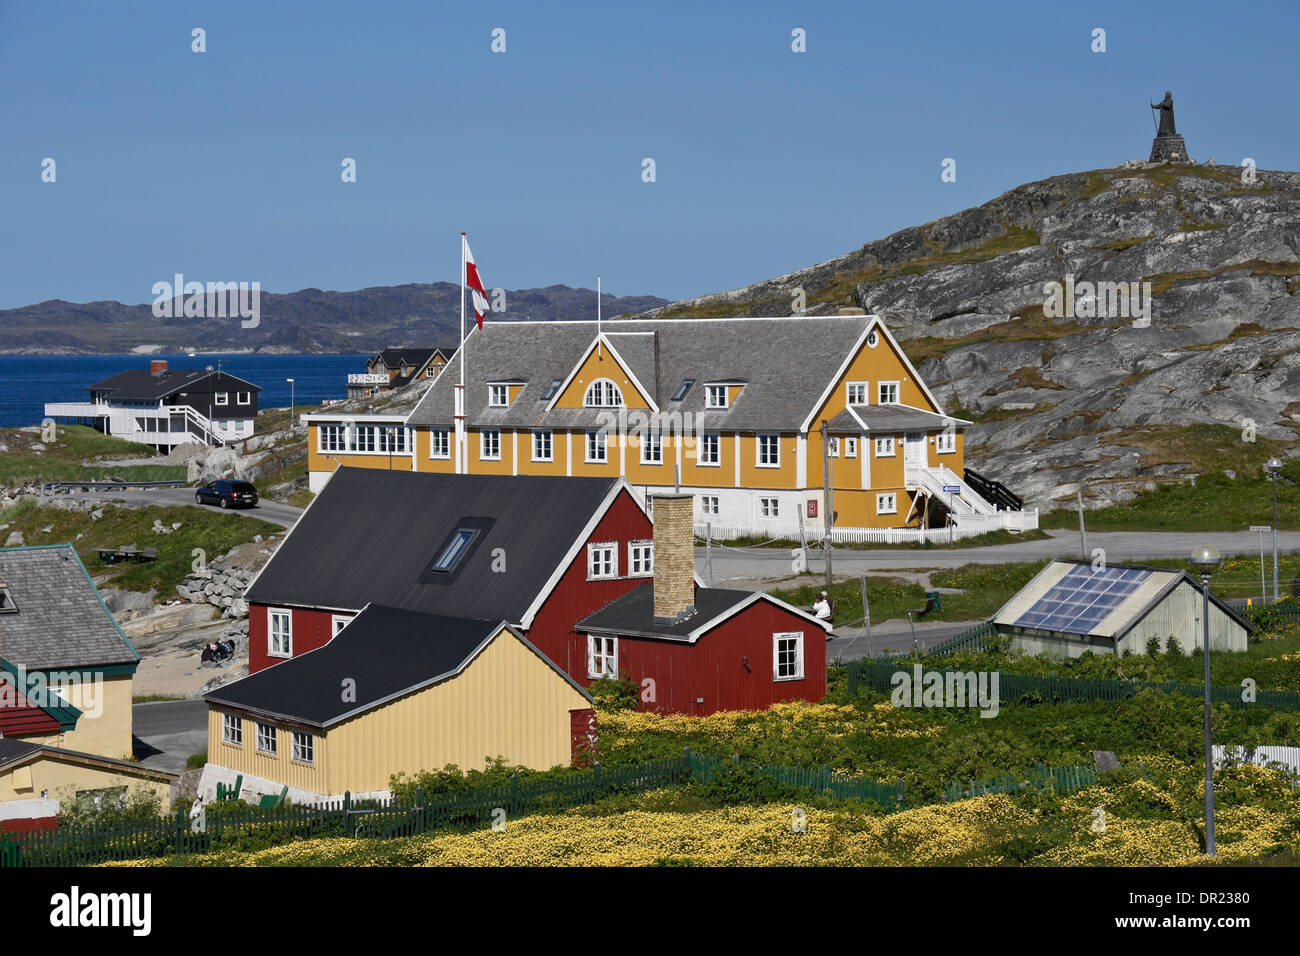 Hans Egede statue on hill, Hans Egede house (yellow in background), and colorful houses in Nuuk (Godthab), Greenland Stock Photo